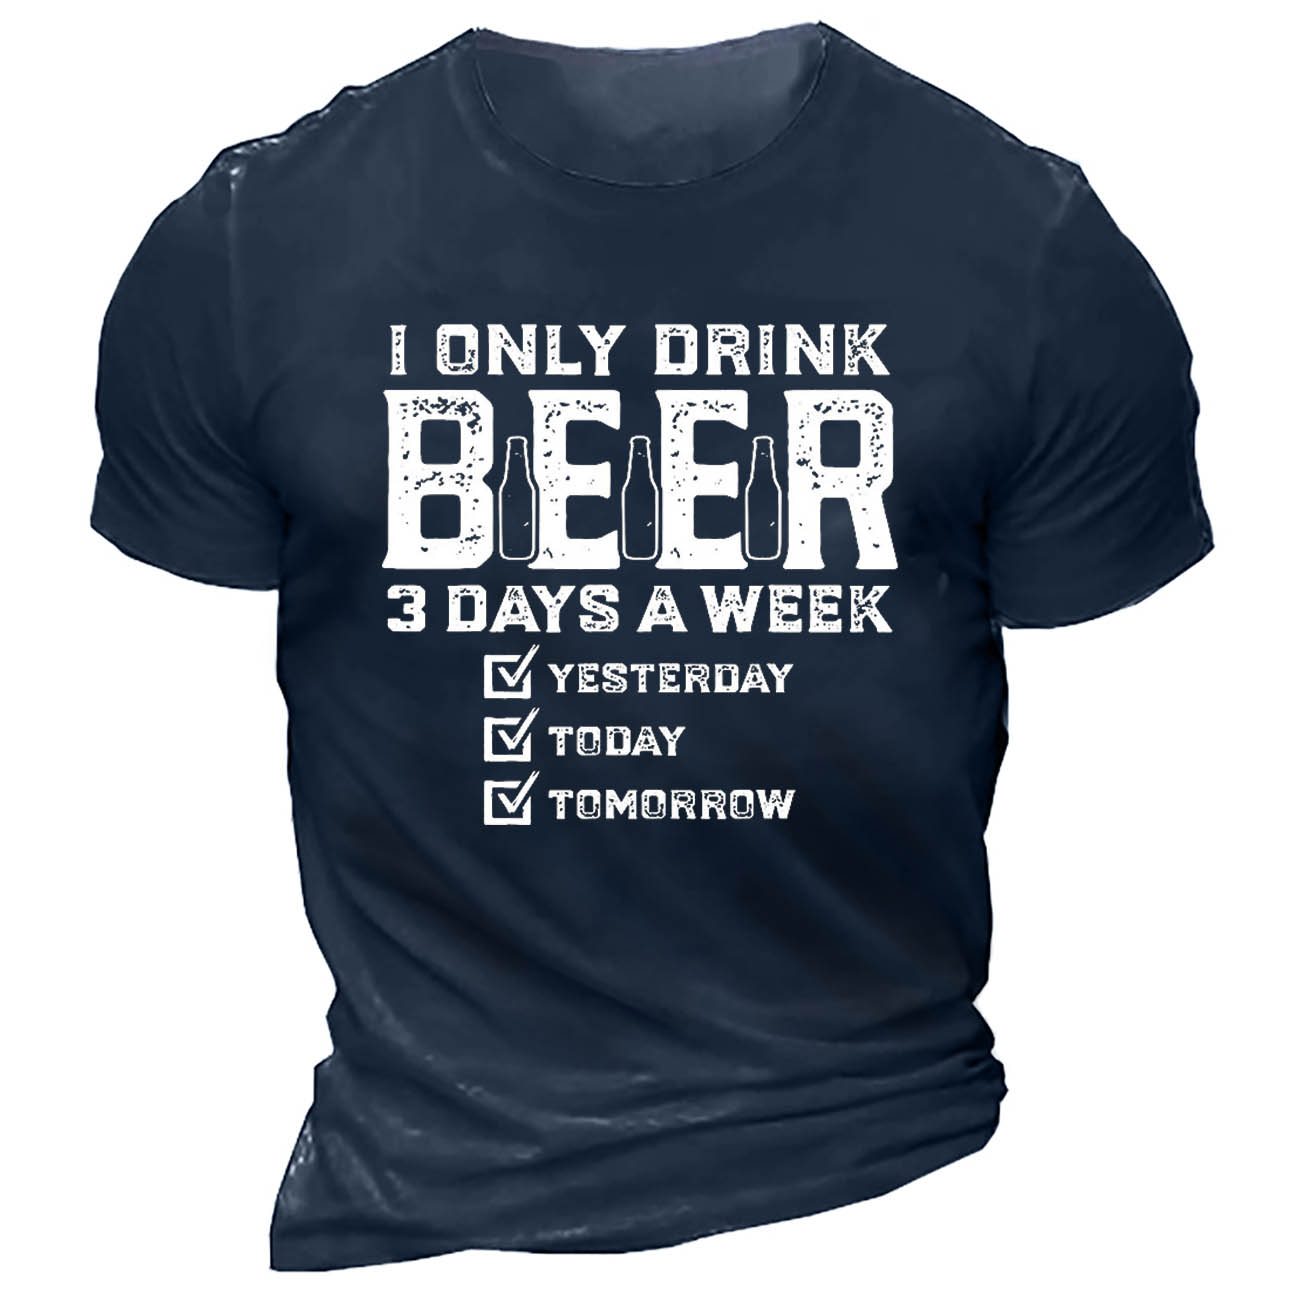 Men's I Only Drink Chic Beer 3 Days A Week Yesterday Today Tomorrow Cotton T-shirt